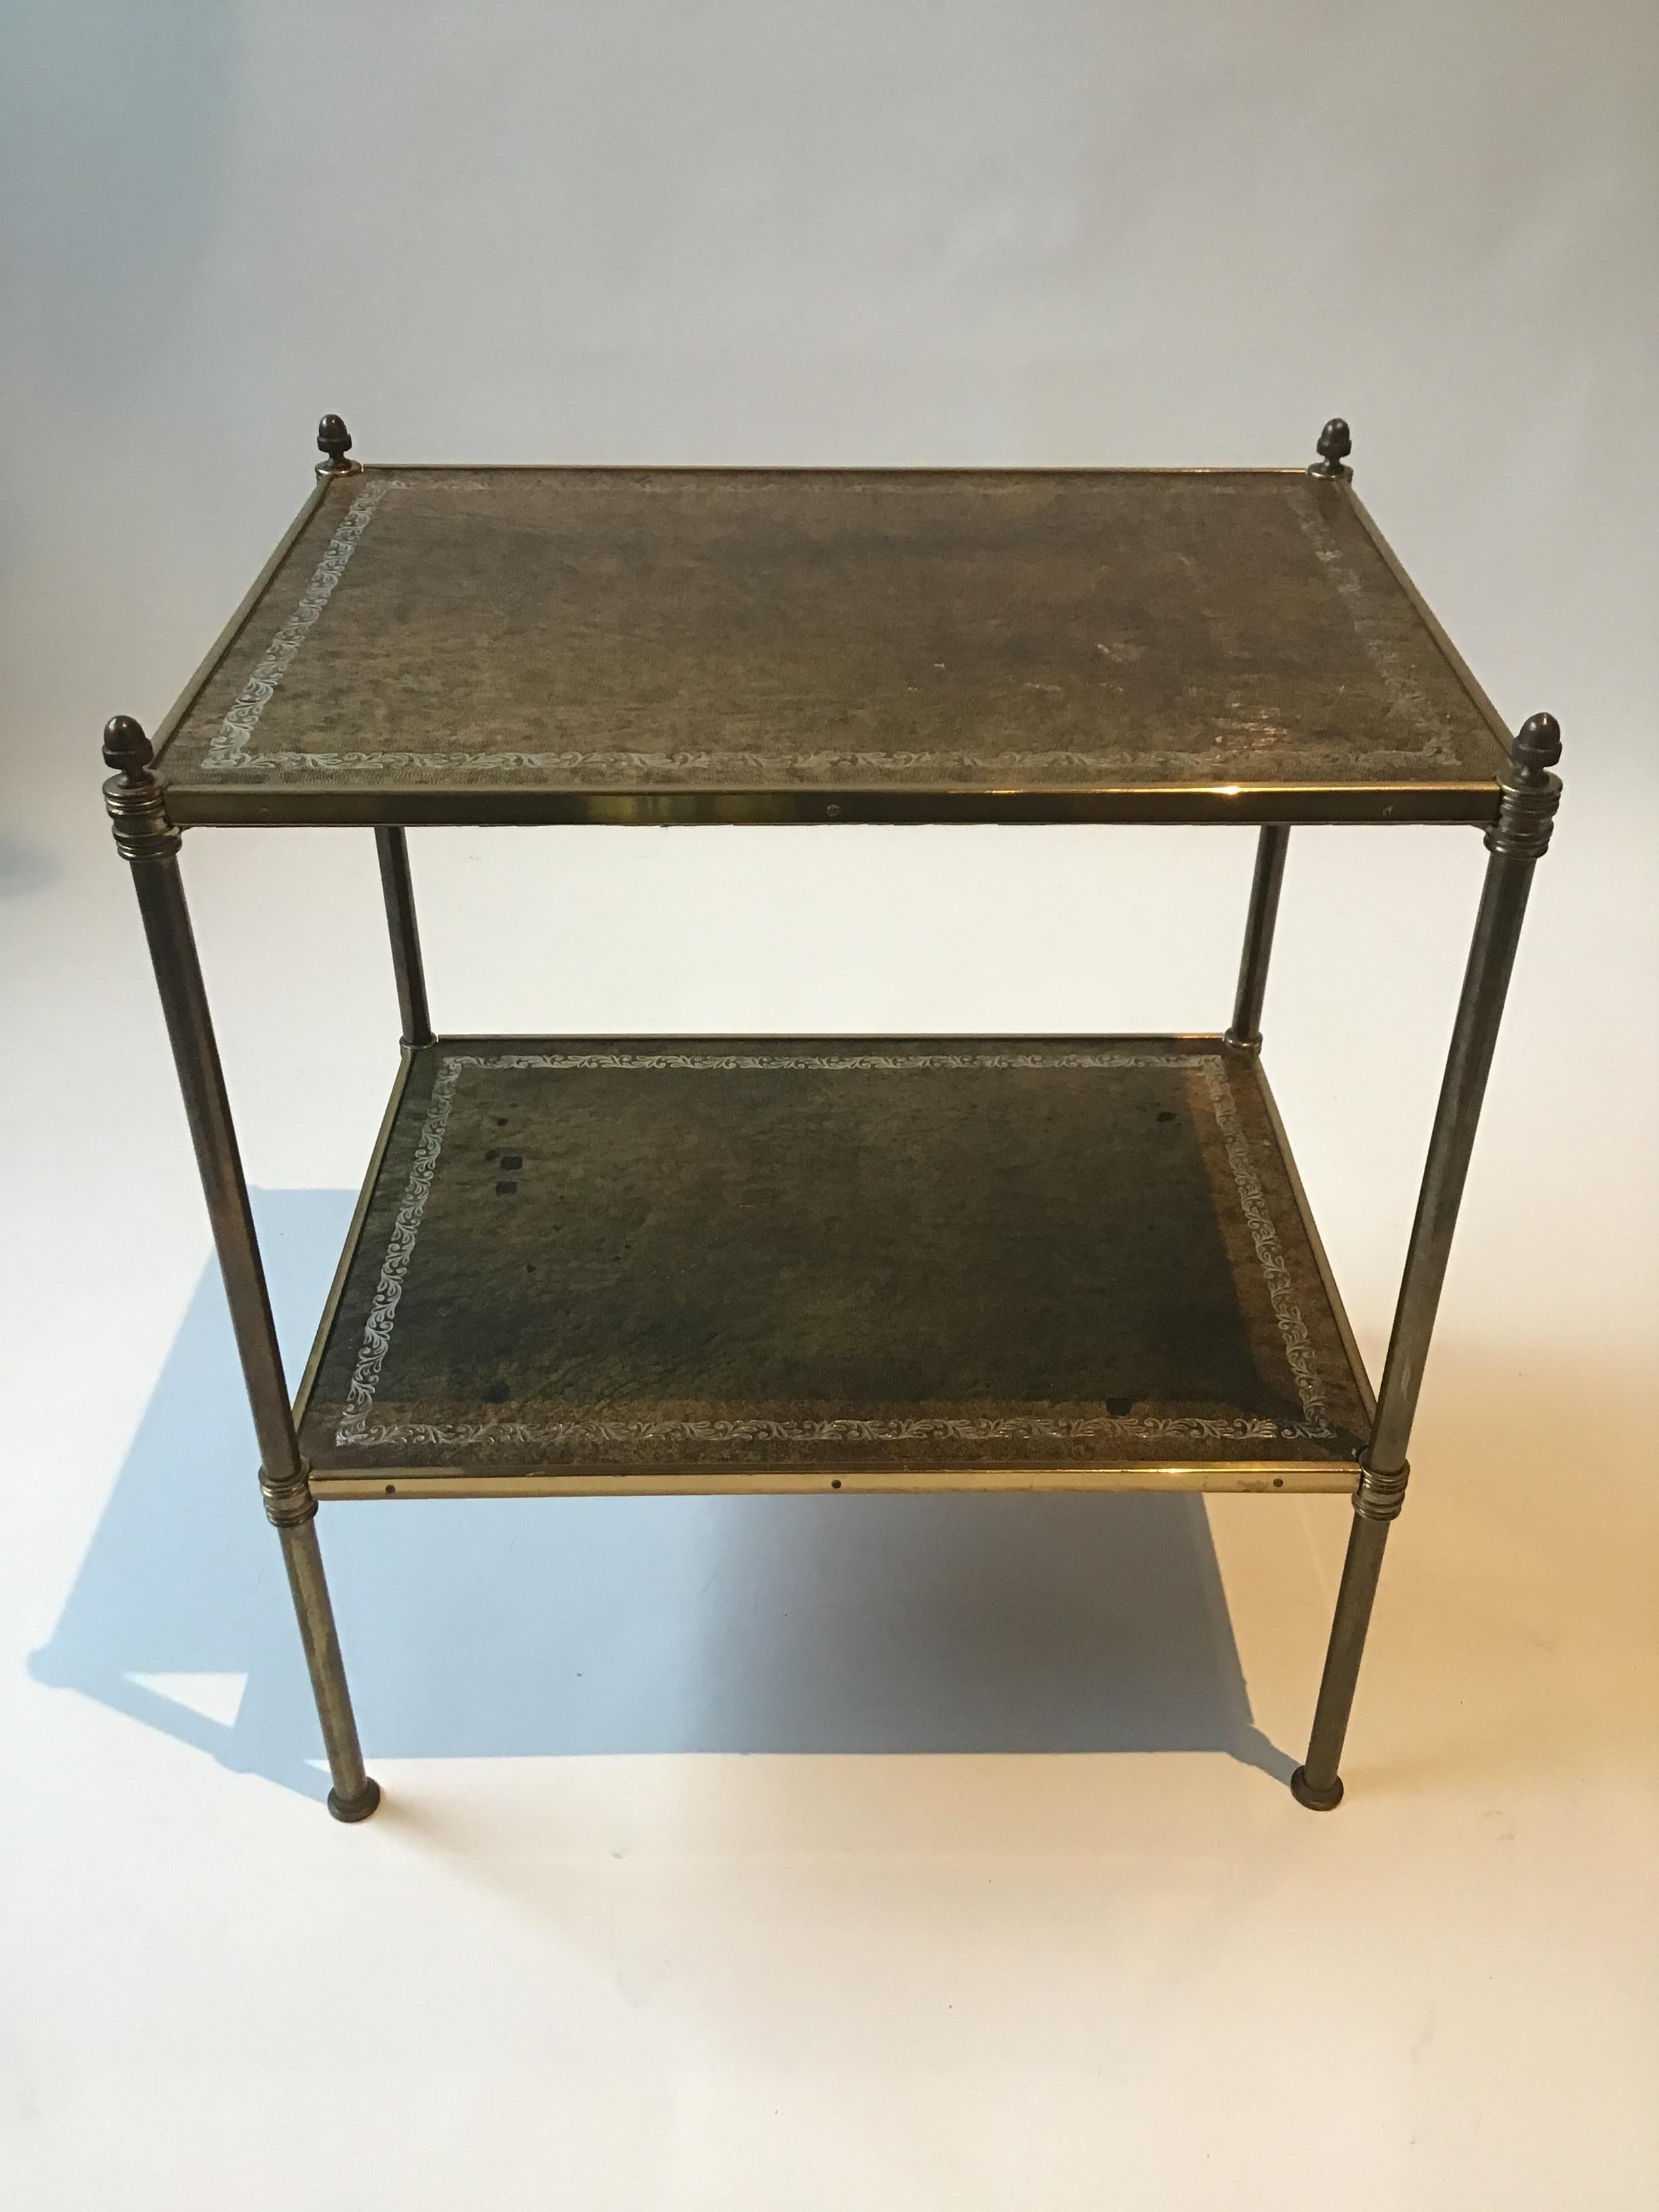 1950s Baguès style two tier leather and brass side table.
This table can be shipped through UPS.